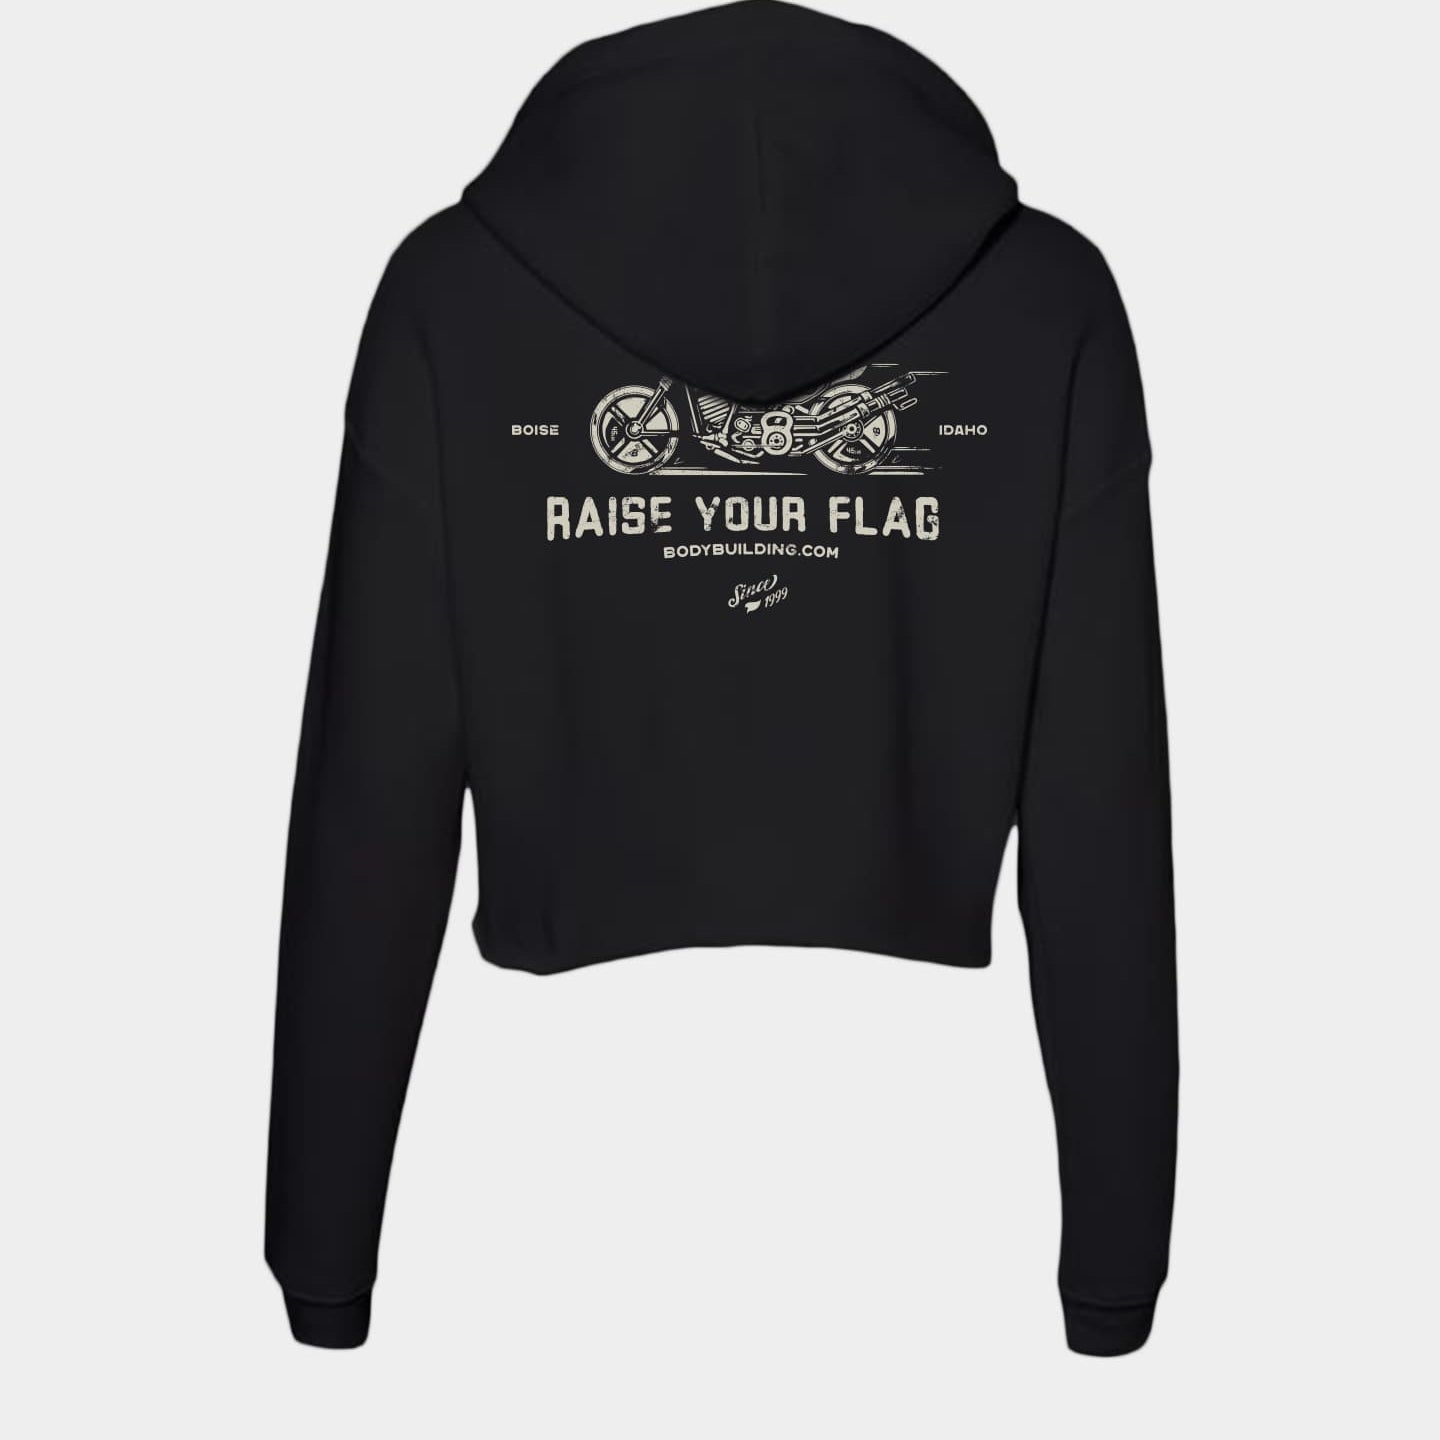 Bodybuilding.com Clothing Raise your Flag Cropped Long Sleeve Hoodie Tee